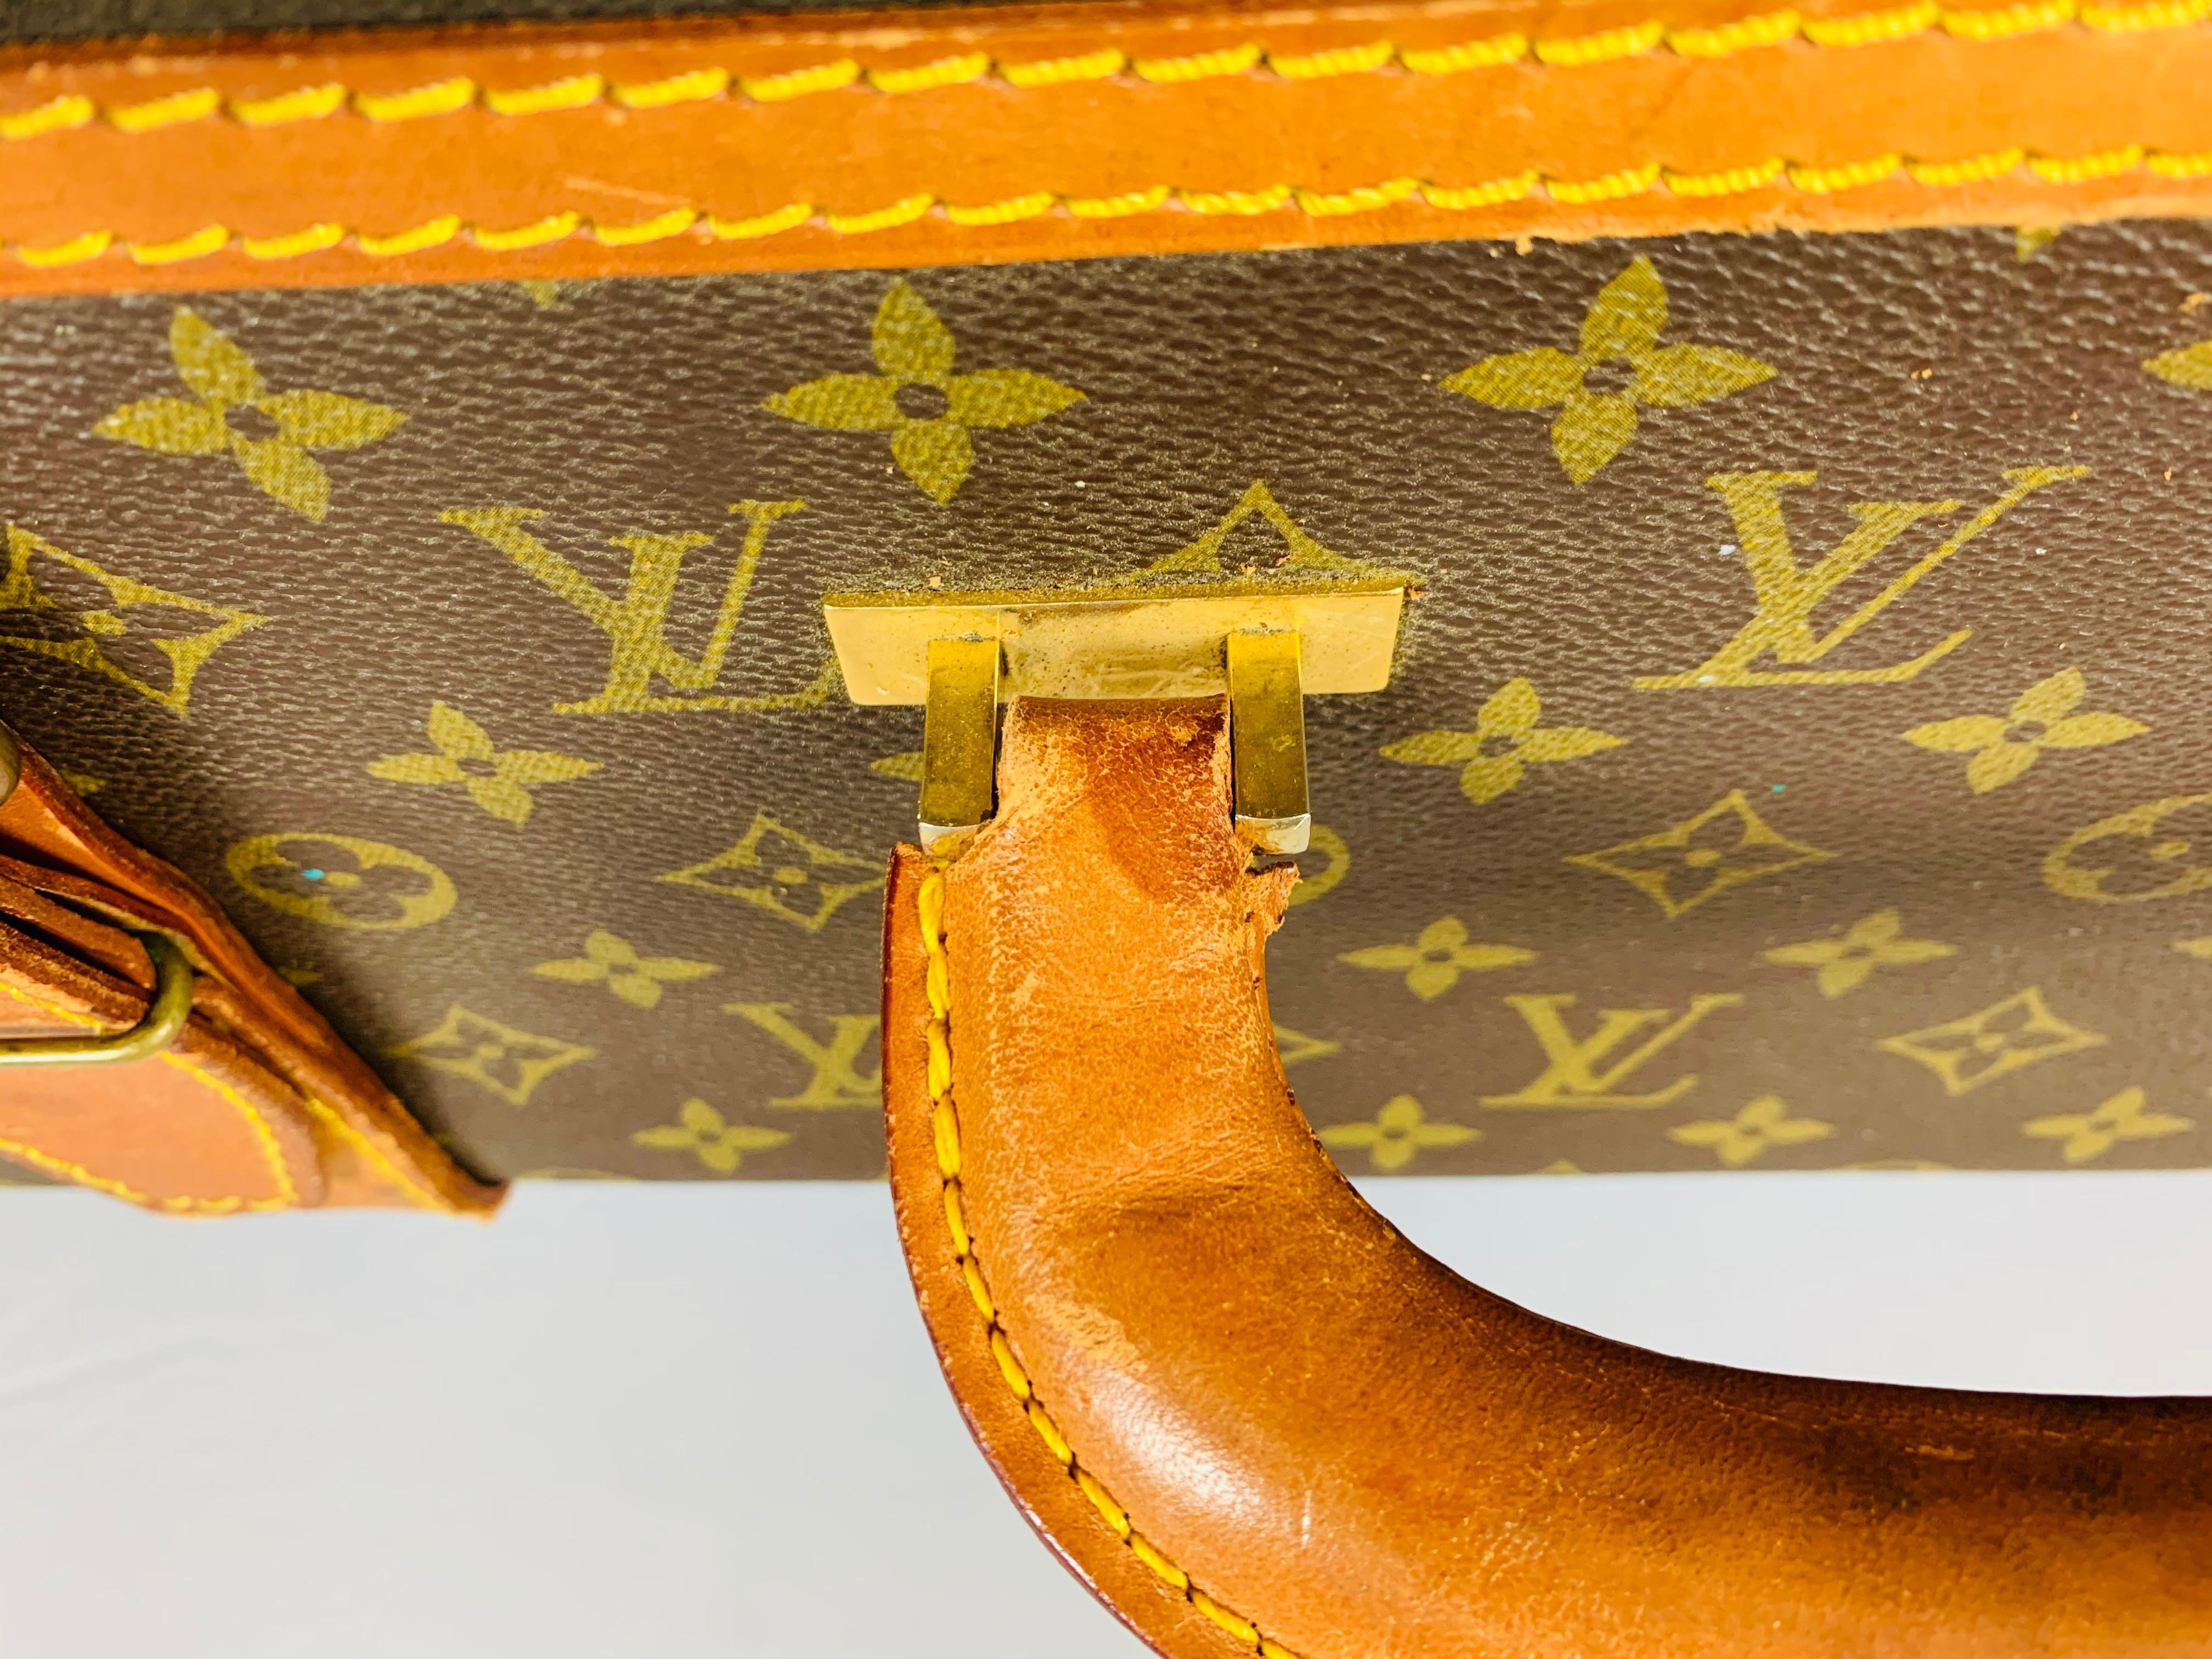 French Louis Vuitton Monogram Holdall Luggage Bag or Suitcase